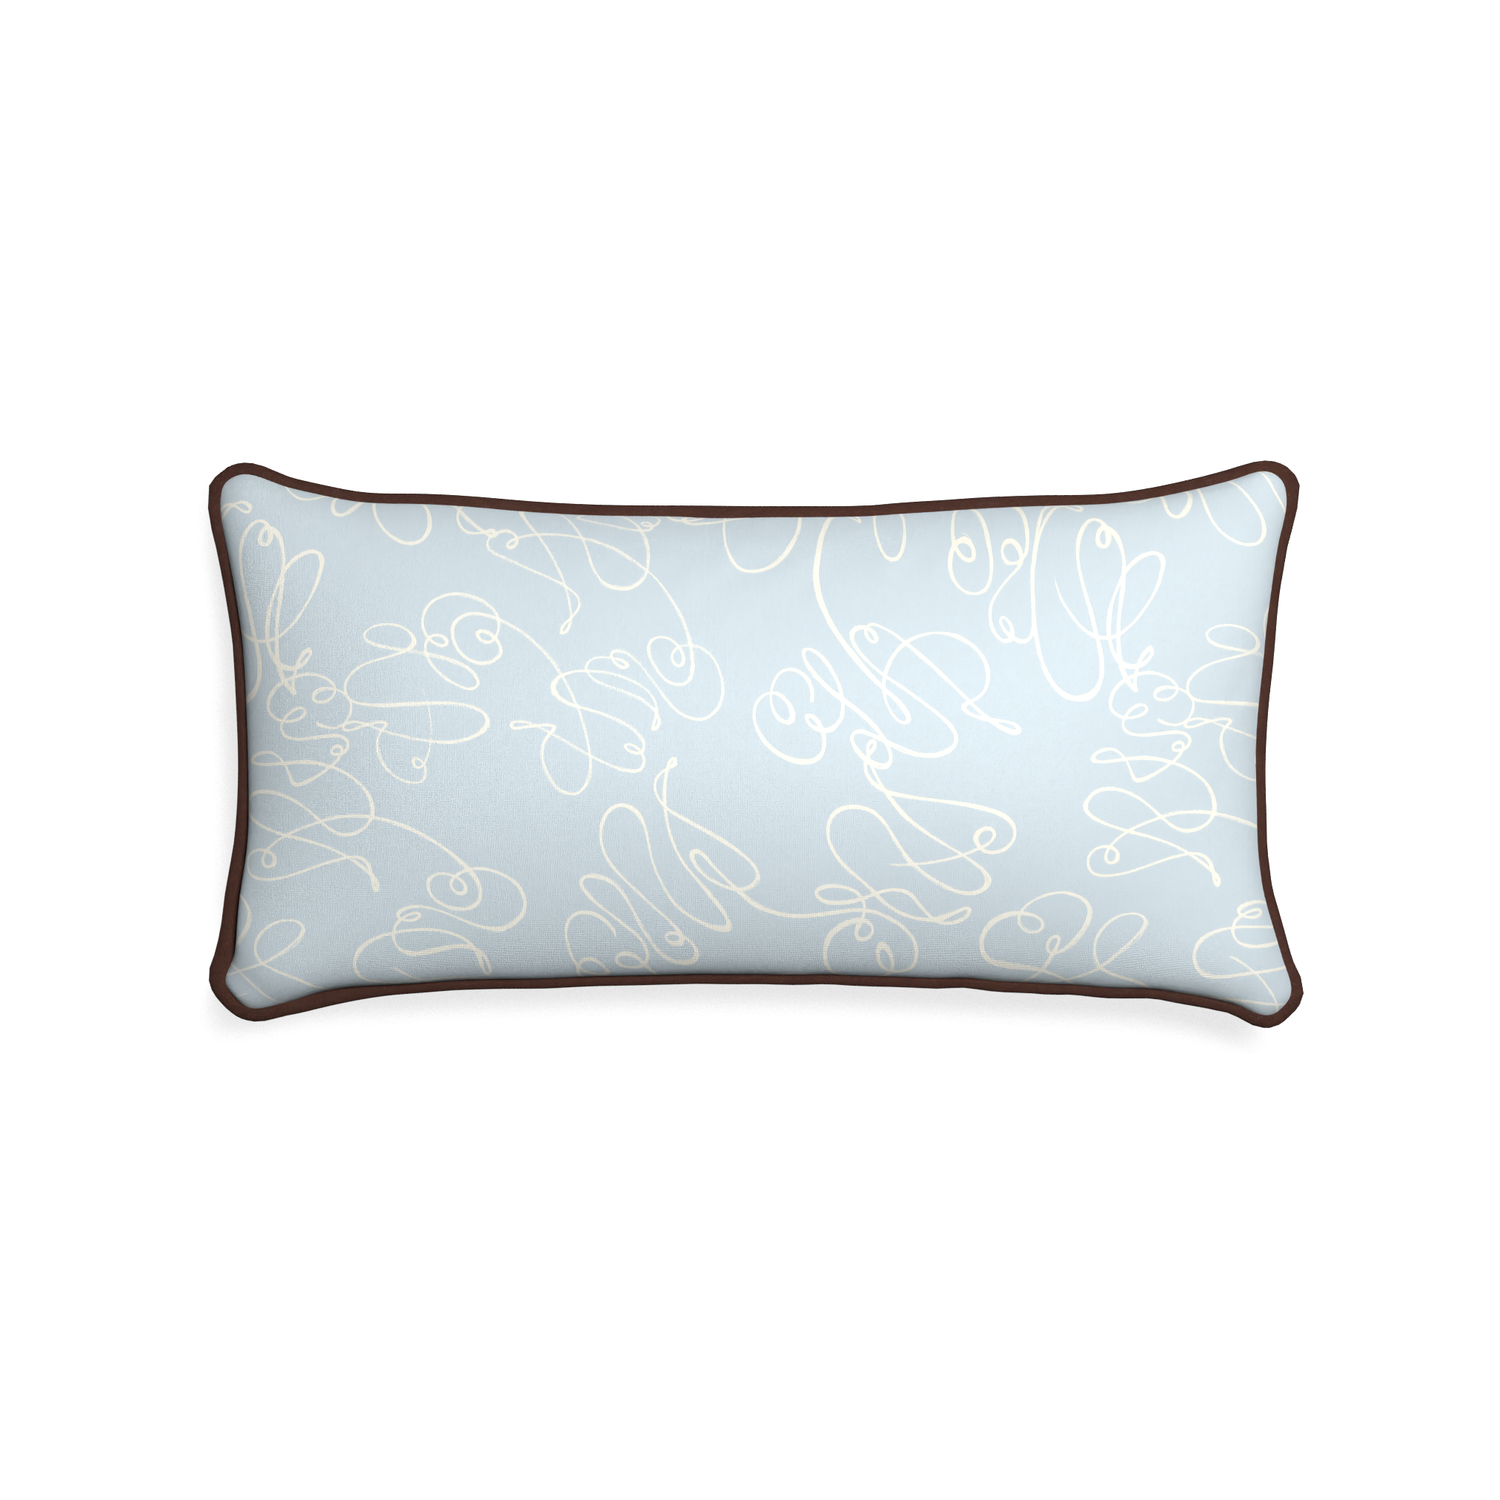 Midi-lumbar mirabella custom powder blue abstractpillow with w piping on white background